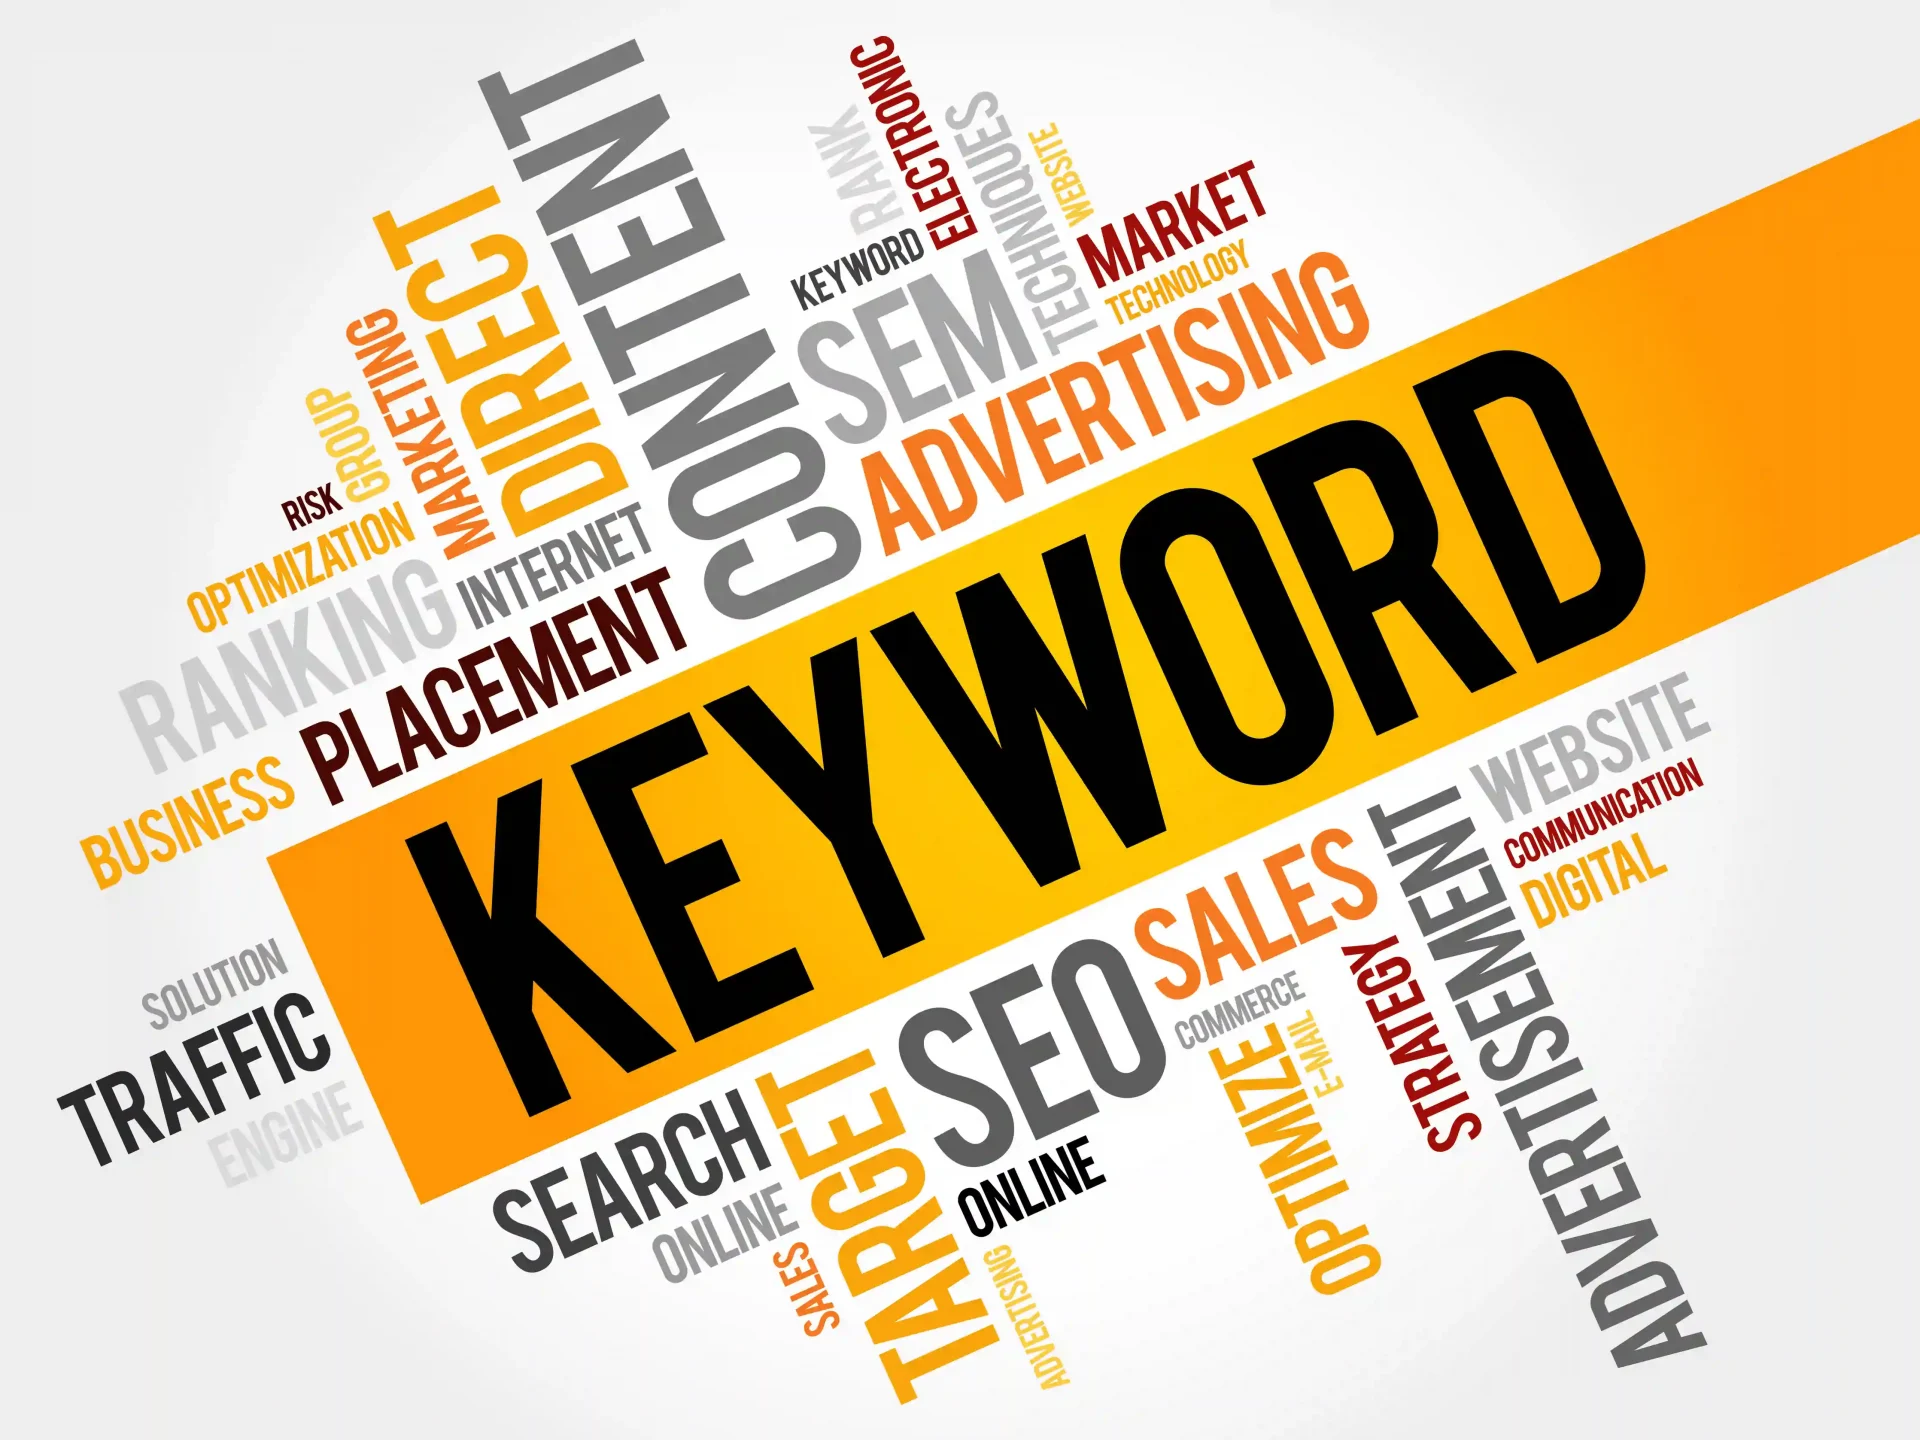 Keywords are an important part of seo work. In the picture, the word keyword is a word among many seo related words.